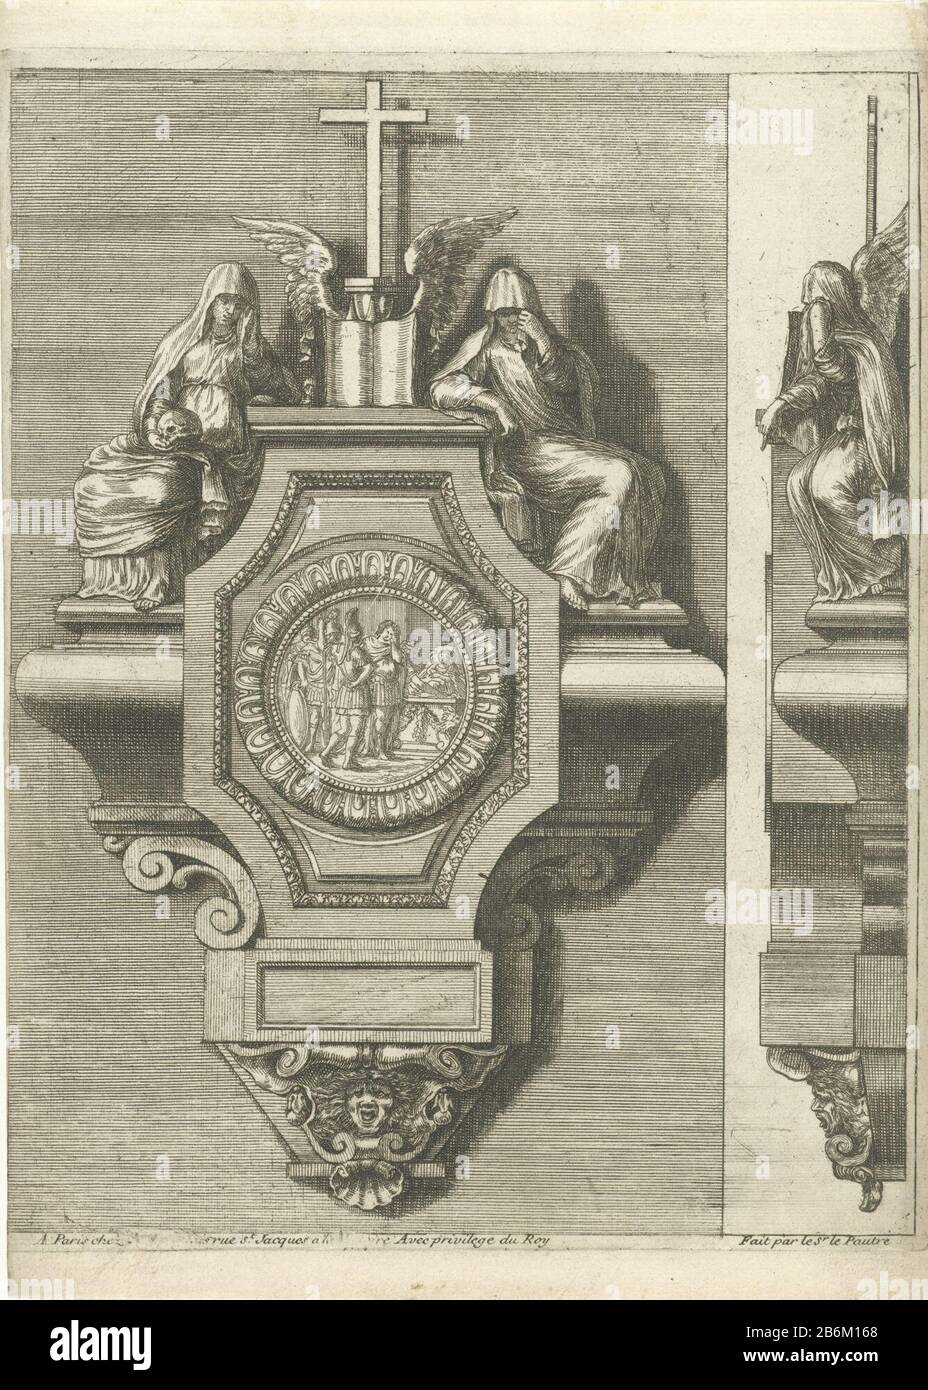 Epitaaf Front and side elevation. Coffin Where: sit two women, left with a skull in her lap. From series of five blades, second editie. Manufacturer : printmaker Jean Lepautre (listed building) in its design: Jean Lepautreuitgever: Nicolas Langlois (I) (listed building) provider of privilege: Louis XIV (King of France) ( listed on object) Place manufacture: printmaker: France (possible) in its design: France (possible) publisher: Paris Date: 1640 - 1703 Material: paper Technique: etching dimensions: plate edge: h 247 mm × W 192 mm Stock Photo